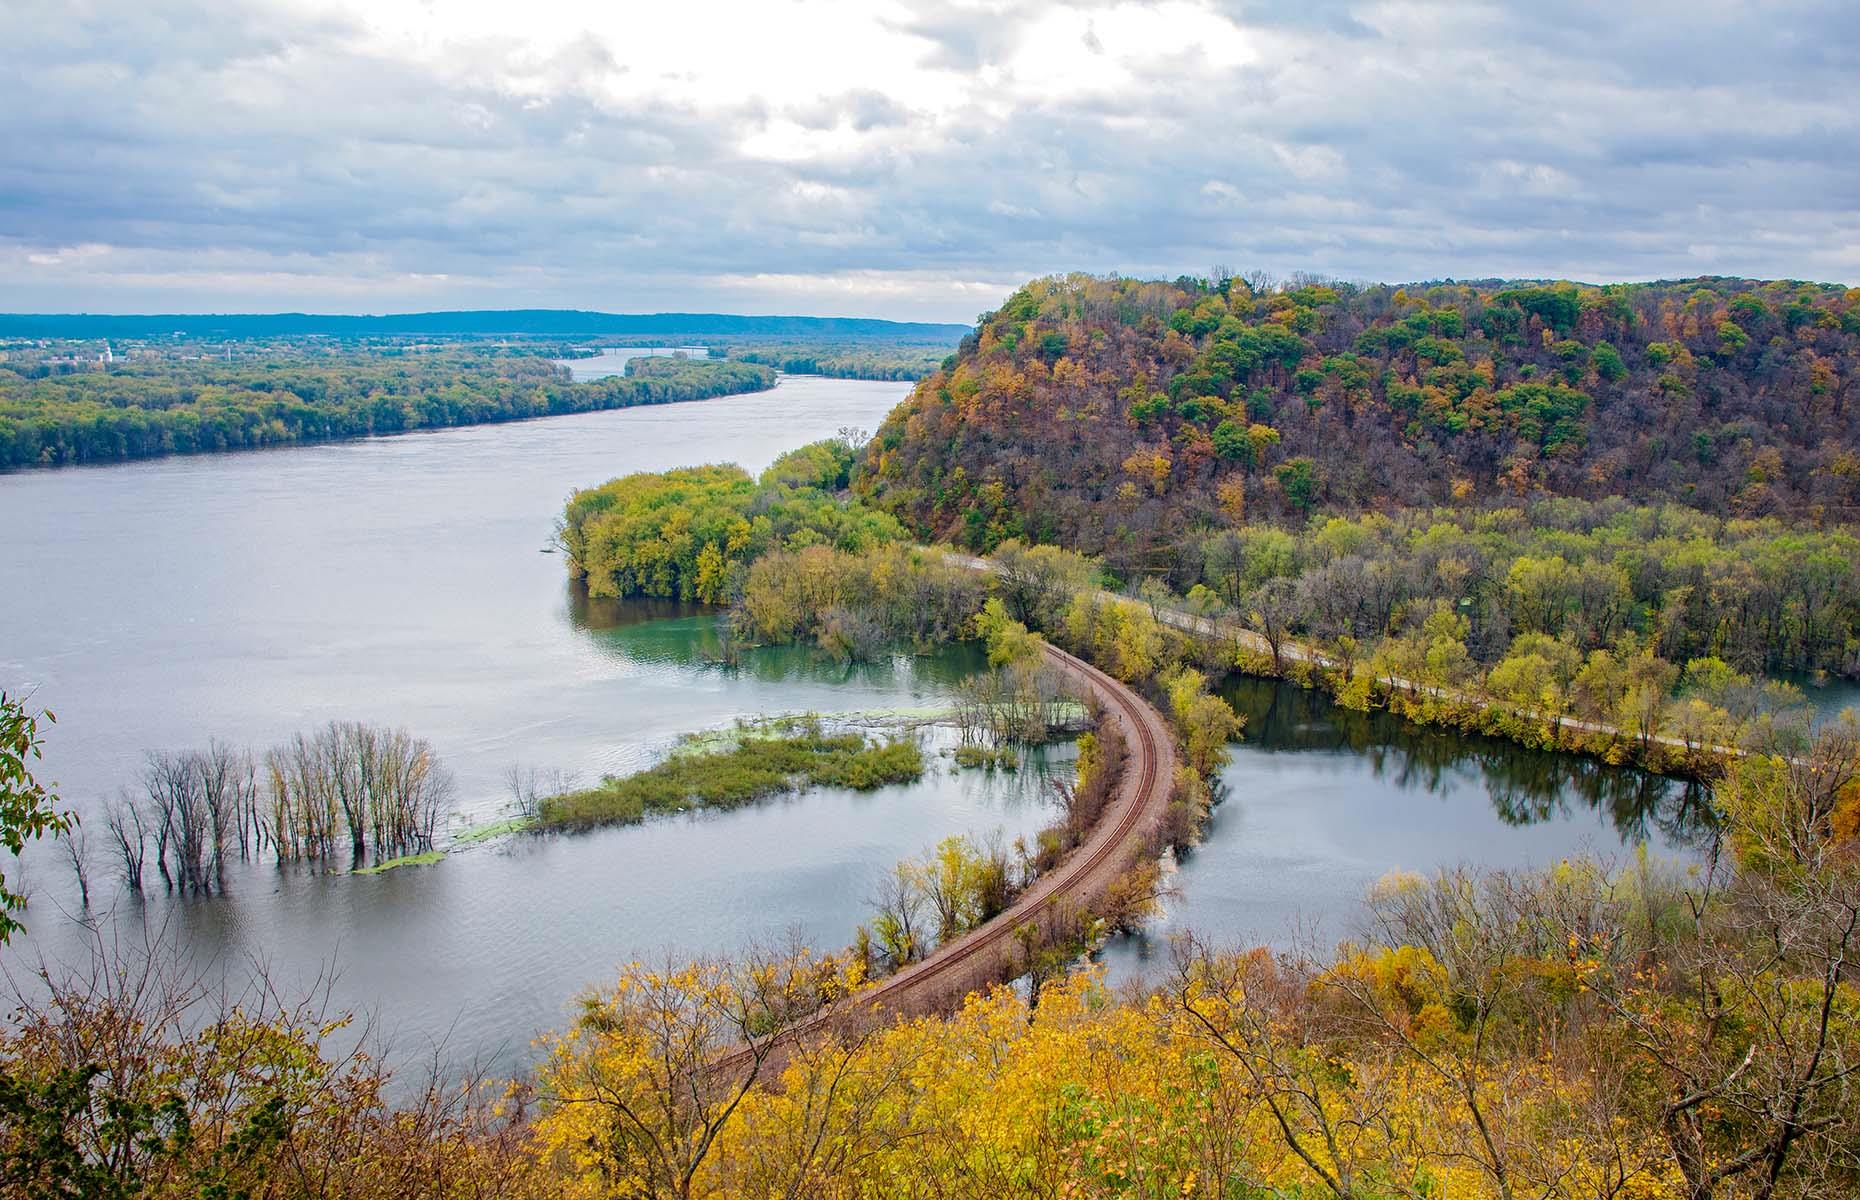 <p>Traversing 10 states in total, <a href="https://www.visittheusa.co.uk/trip/going-down-great-river-road">this epic patchwork of highways and roads</a> follows the Mississippi River for around 3,000 miles (4,828km) – eight of those stretches of road have been designated an All-American Road this year. Passing through sprawling cities like New Orleans, Memphis and St Louis, following the Natchez Trace Parkway and winding past prehistoric burial mounds at Effigy Mounds National Monument (pictured), the route is dynamic and wonderfully eclectic with myriad attractions along the way. Just one constant remains though – the legendary river itself.</p>  <p><strong><a href="https://www.loveexploring.com/galleries/108060/americas-most-beautiful-rivers">Check out America's most beautiful rivers</a></strong></p>